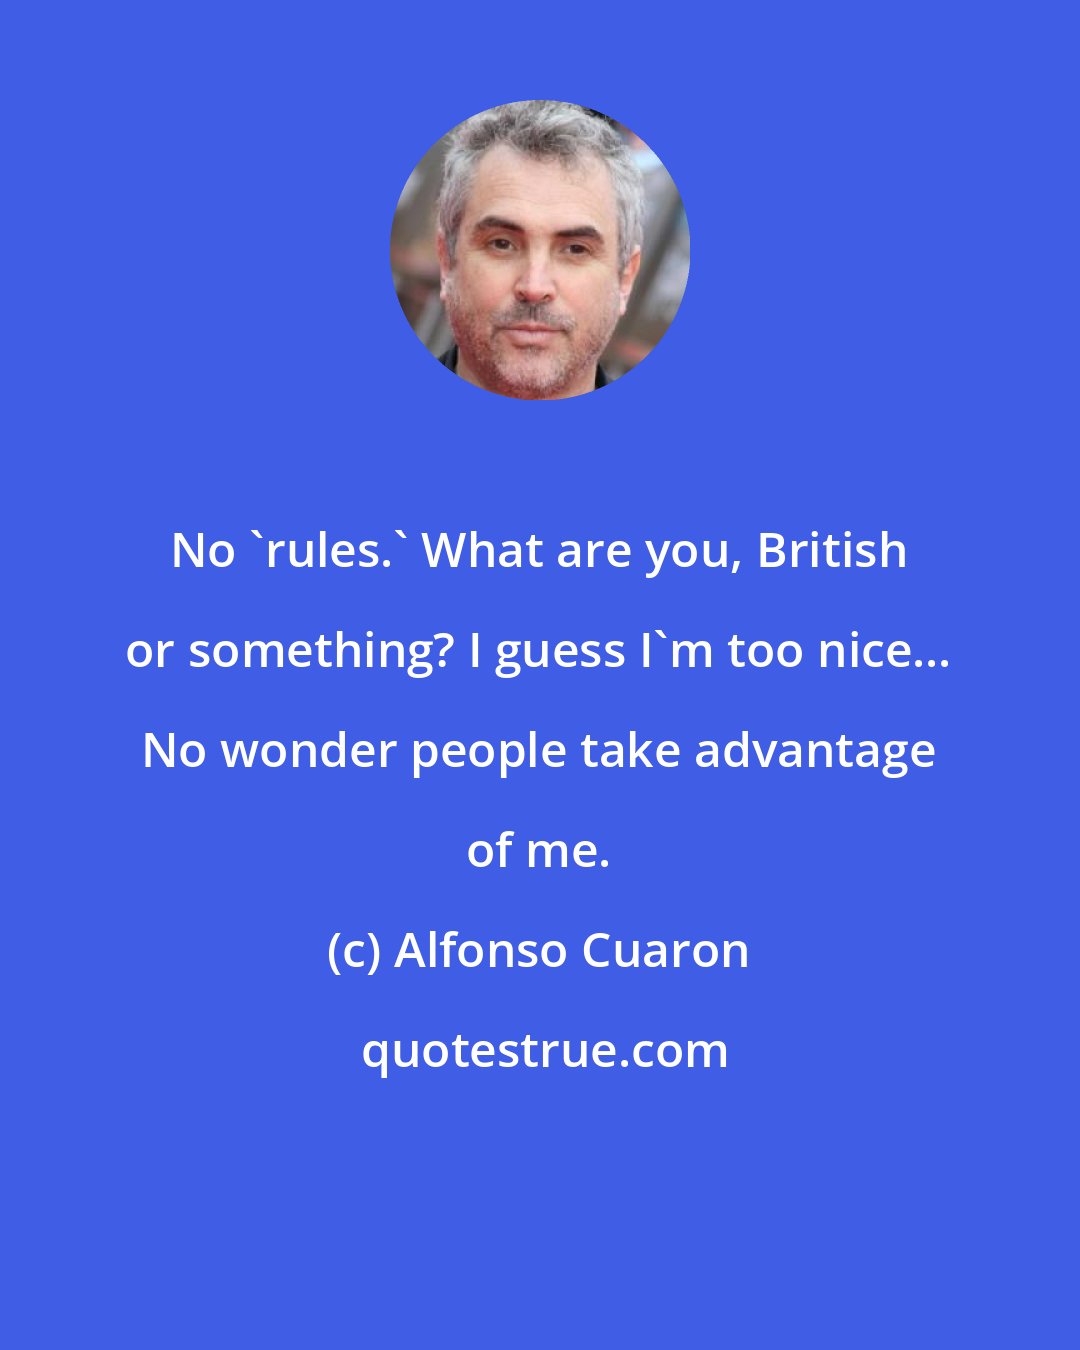 Alfonso Cuaron: No 'rules.' What are you, British or something? I guess I'm too nice... No wonder people take advantage of me.